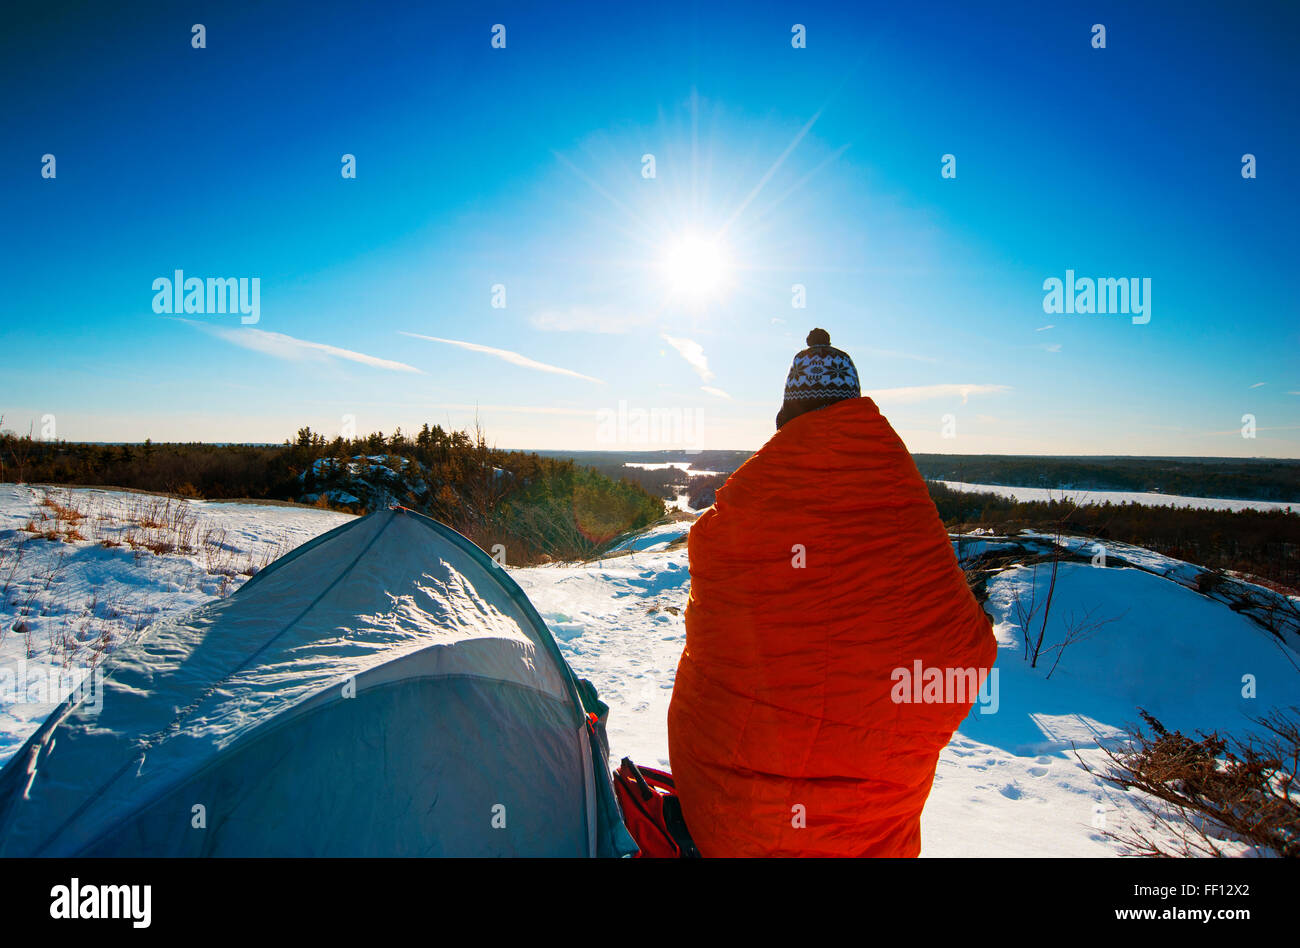 Hiker standing at snowy campsite Stock Photo